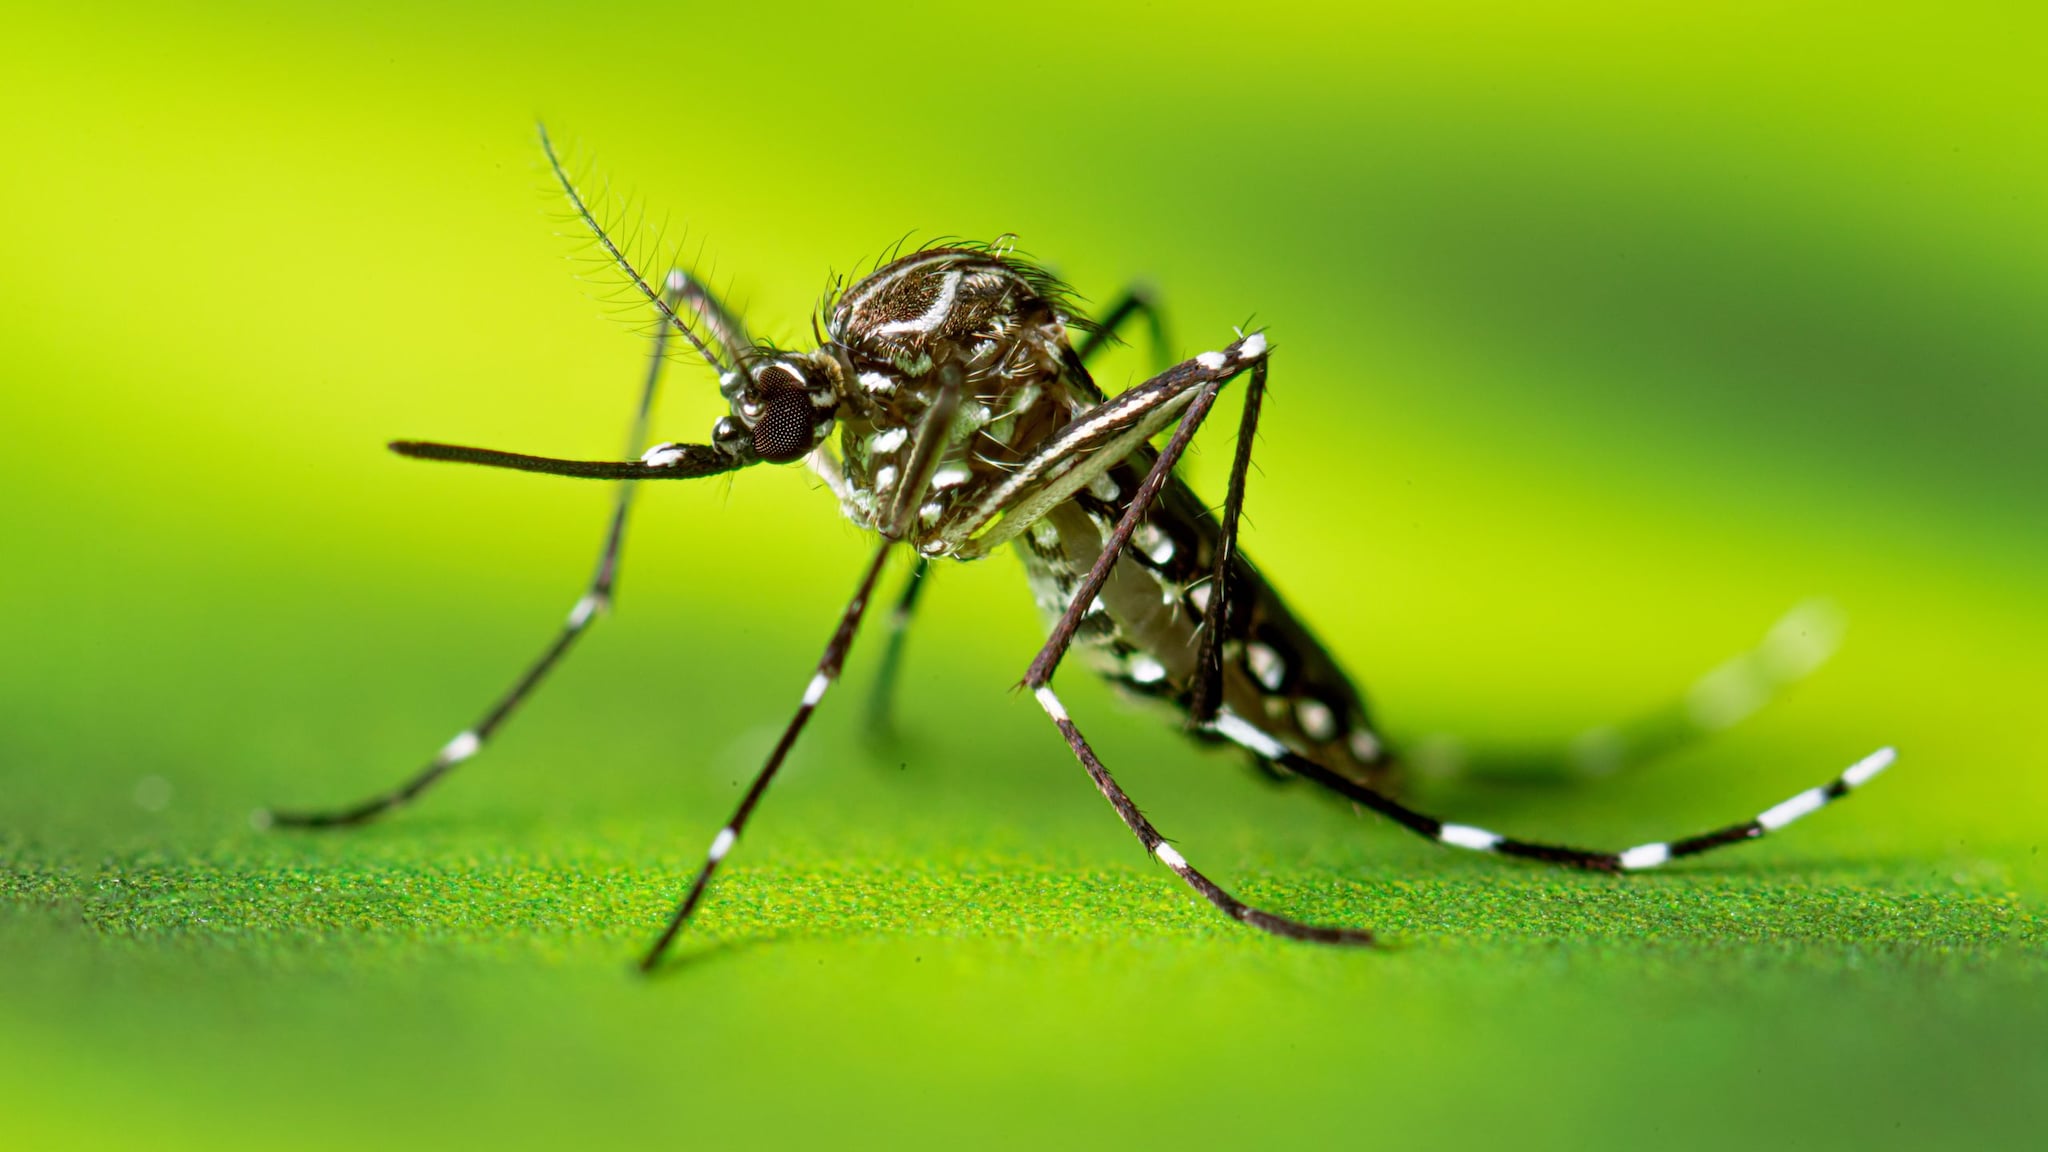 Aedes aegypti mosquito on a green background